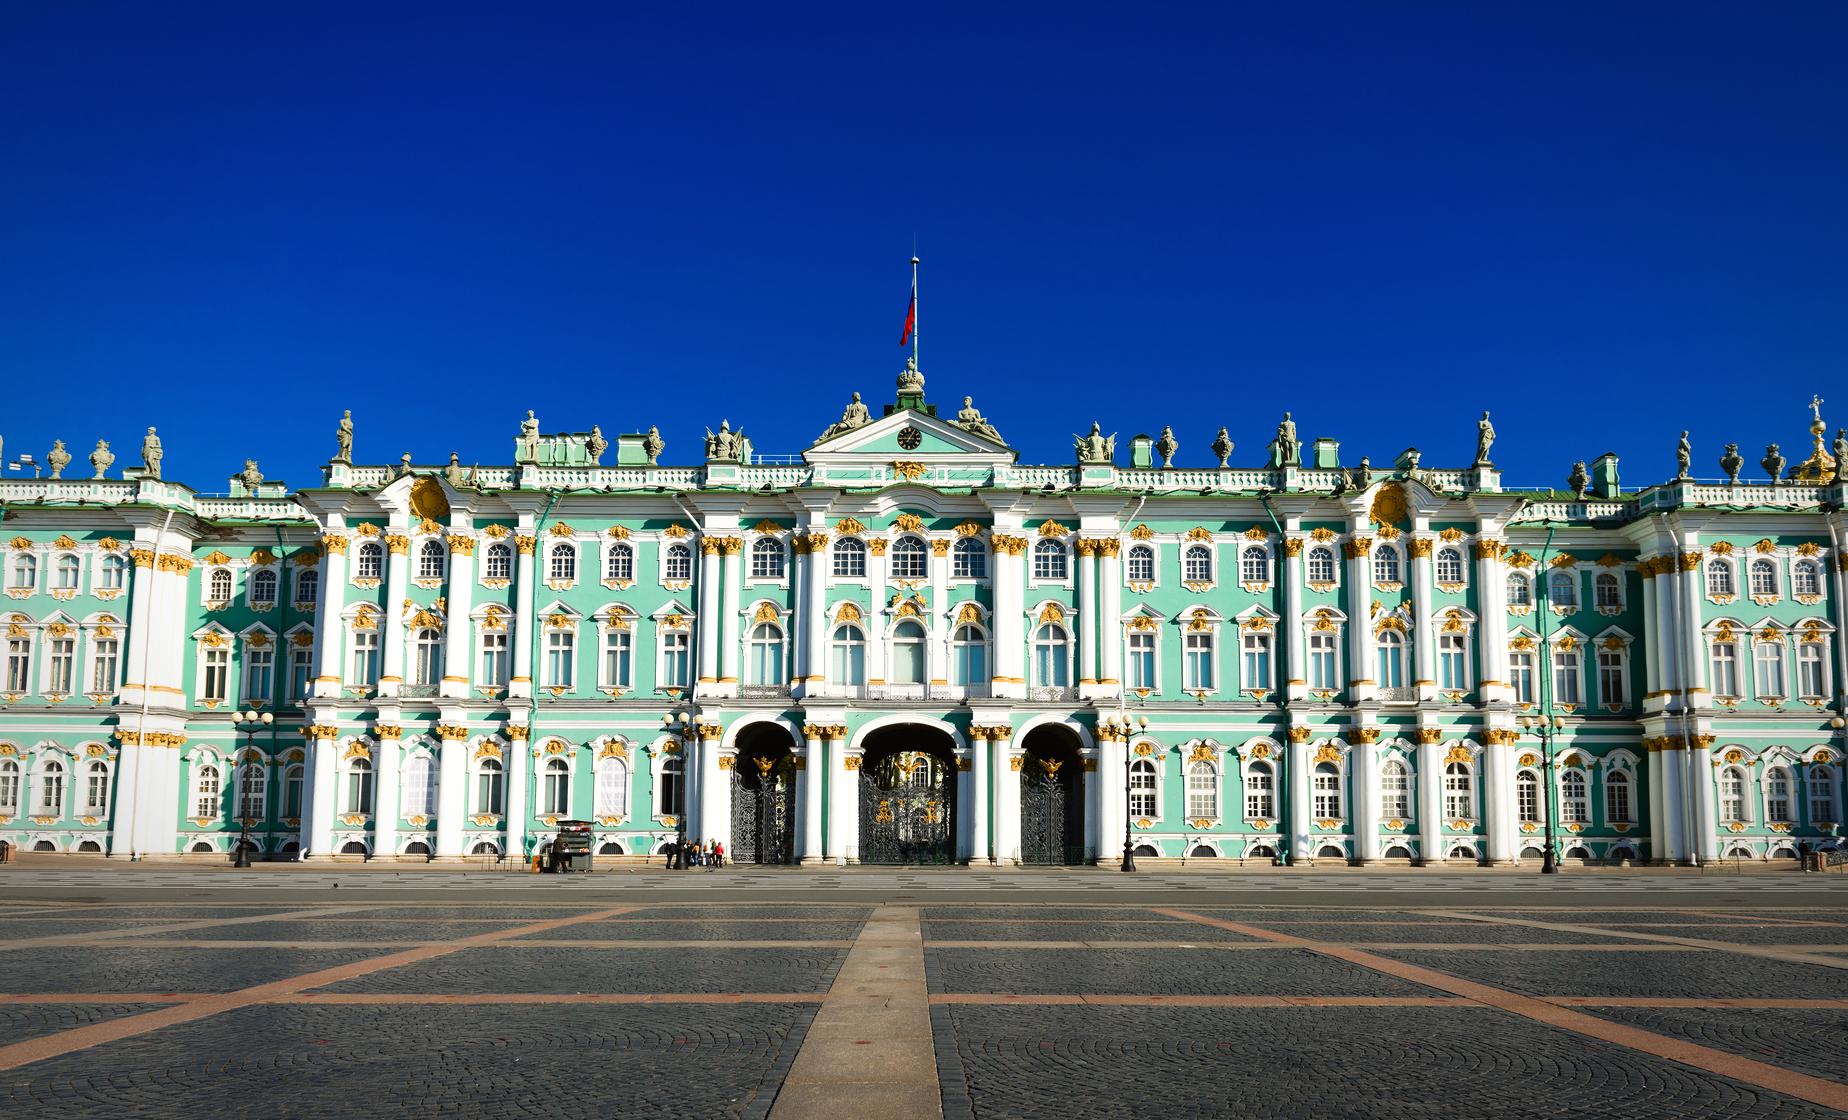 Private Hermitage Museum Tour in St. Petersburg